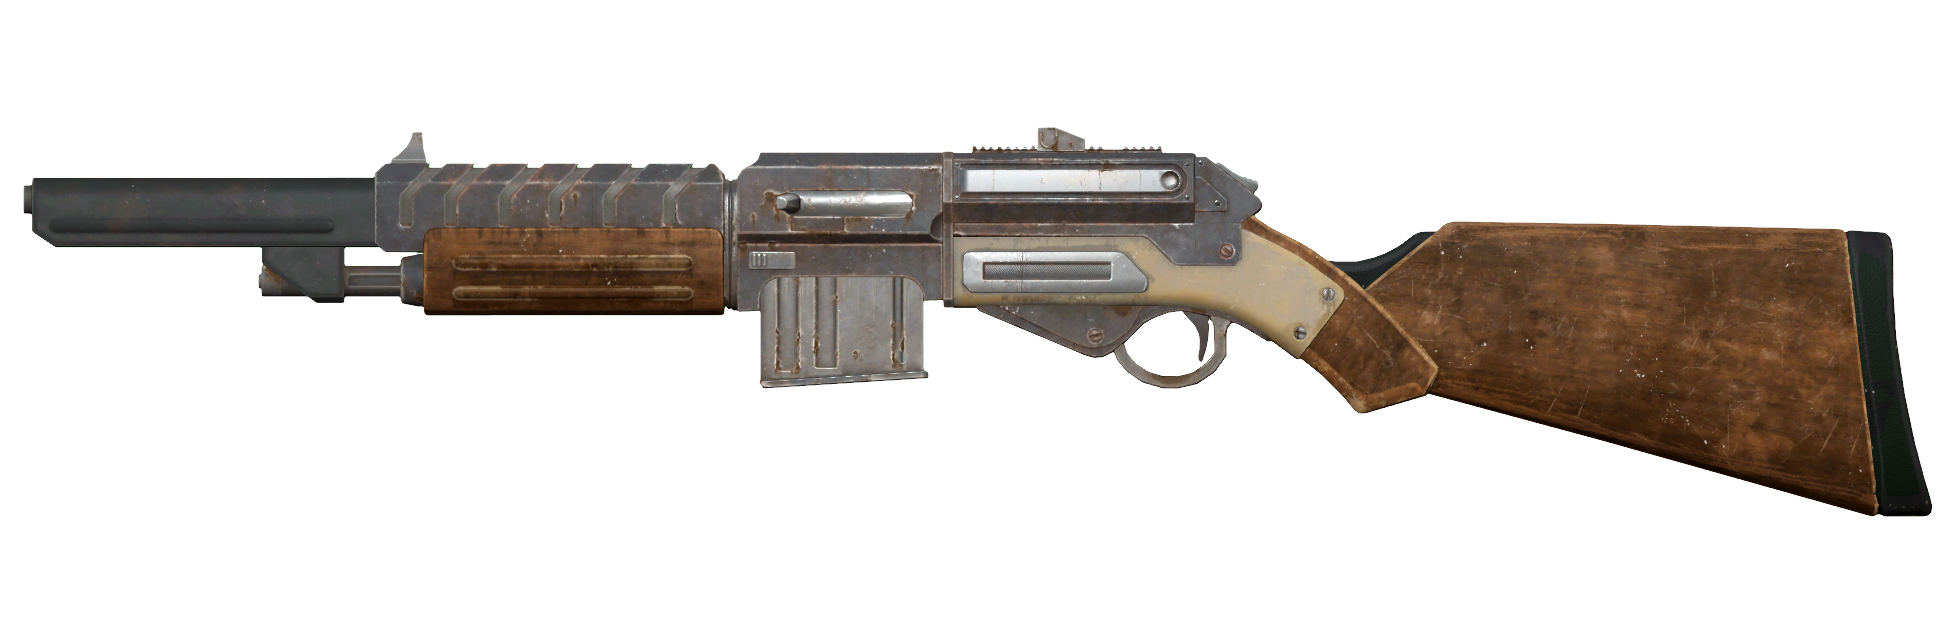 Fallout 4 automatic weapons фото 94